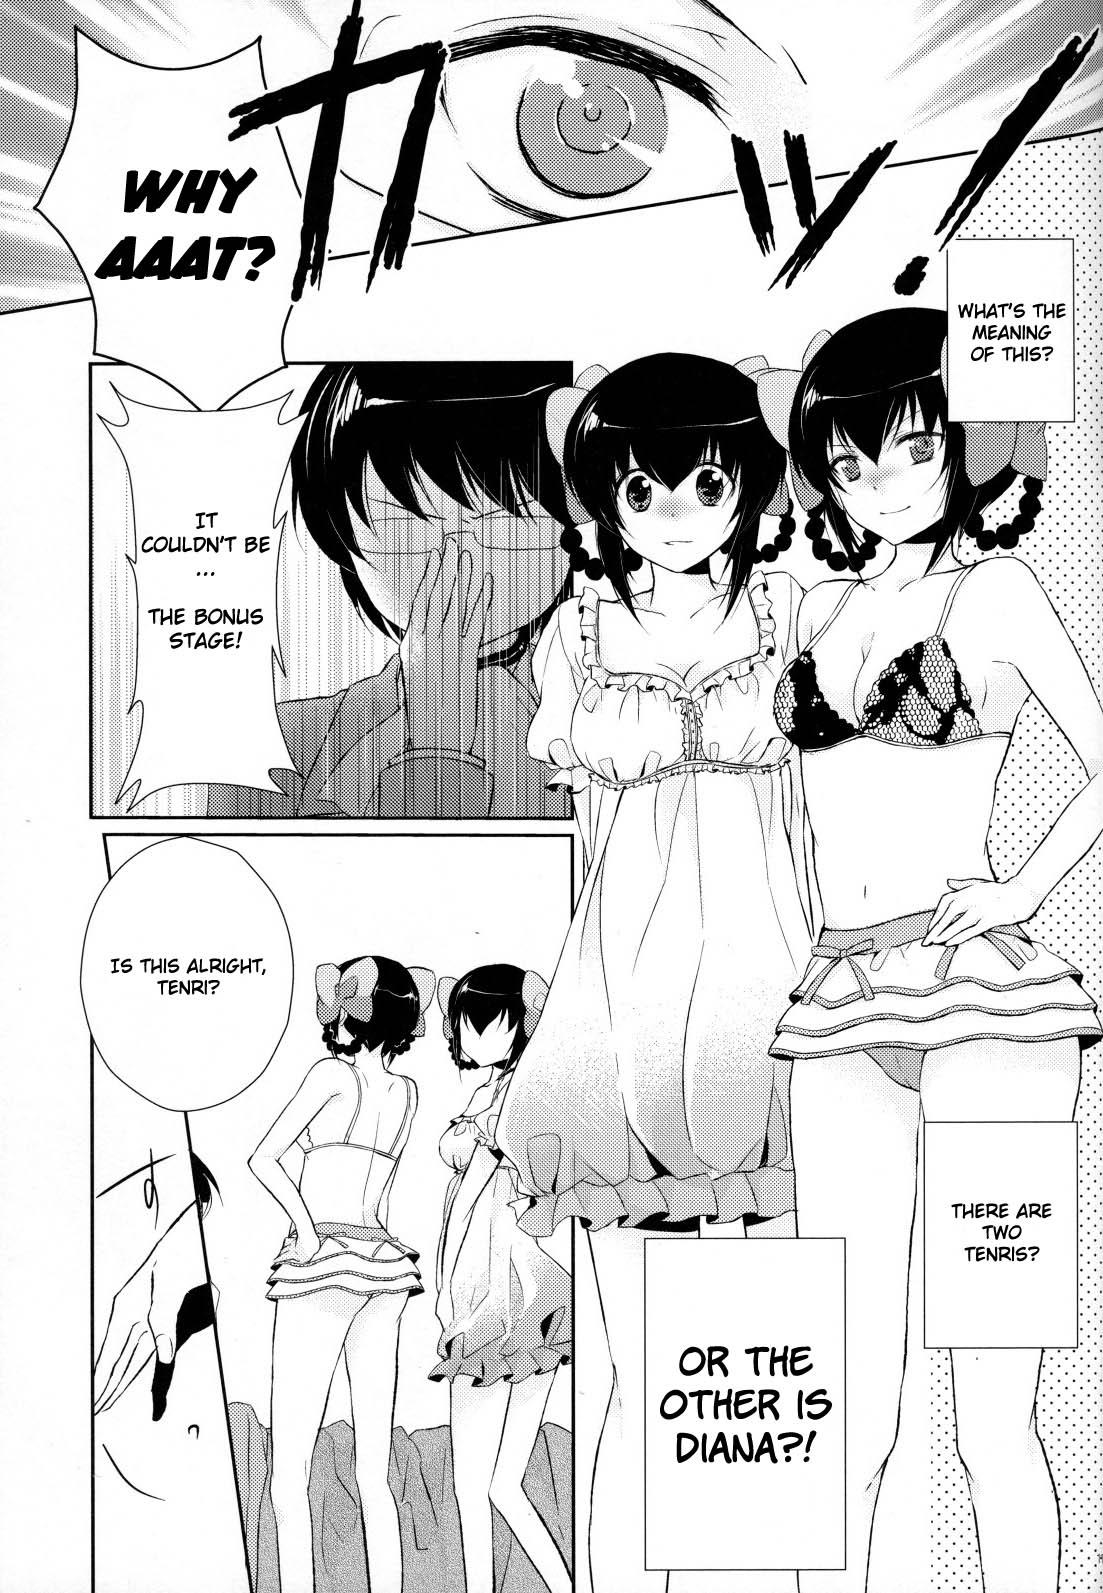 Daddy Kamisama no Hentai Play Nikkichou 2 | Kamisama's Hentai Play Diary 2 - The world god only knows Best Blow Jobs Ever - Page 10